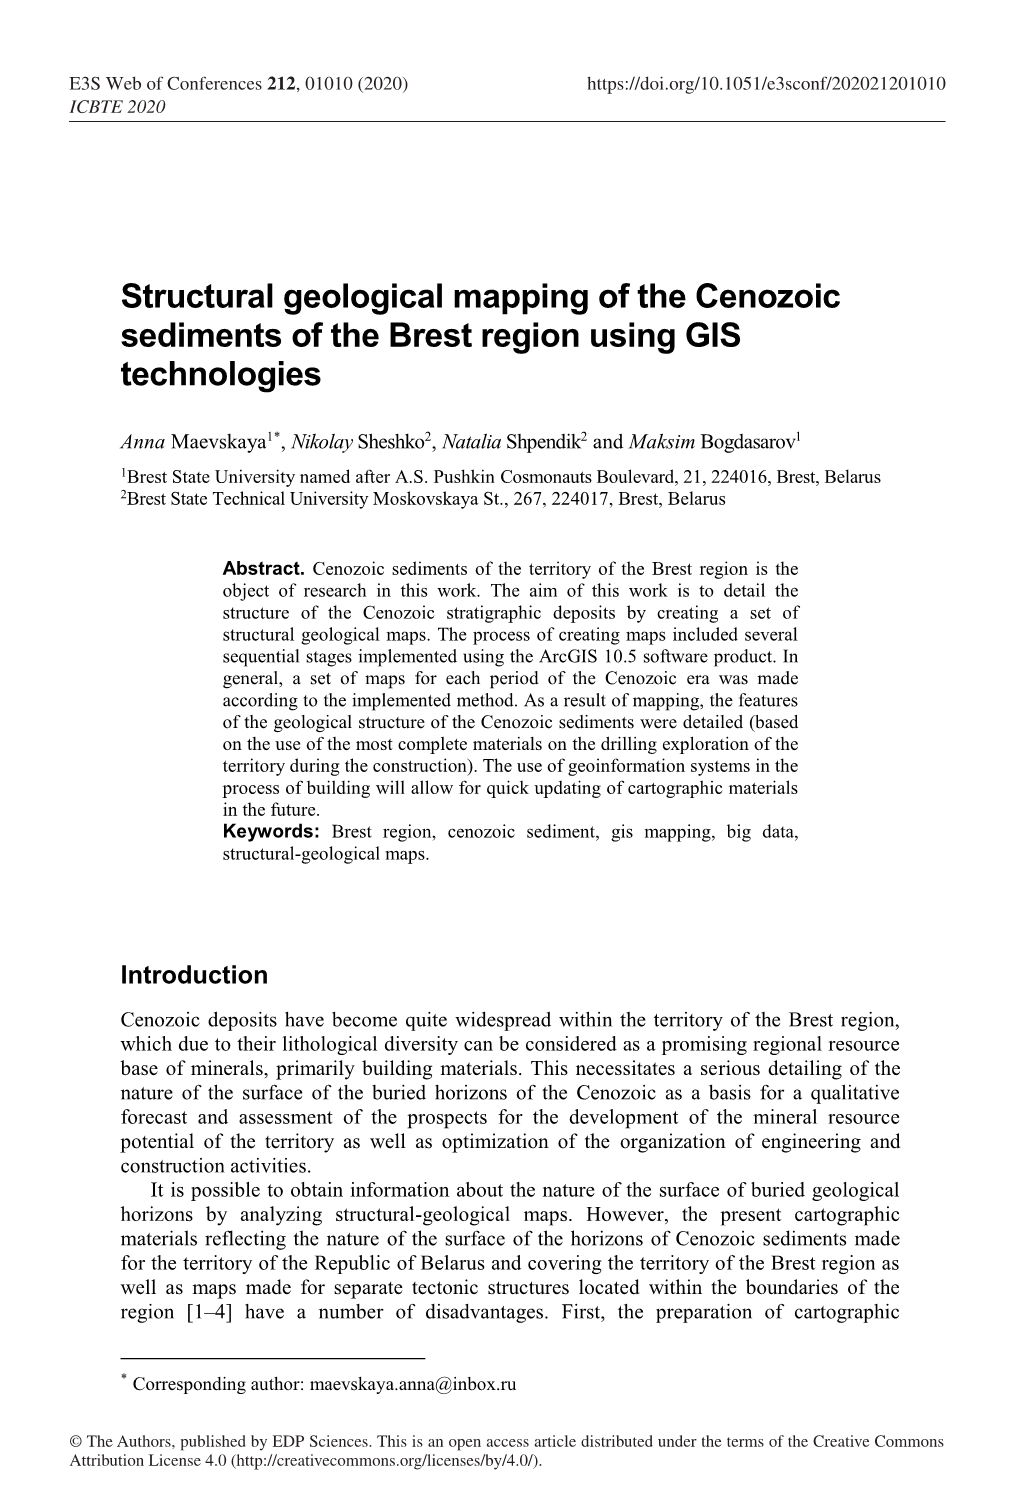 Structural Geological Mapping of the Cenozoic Sediments of the Brest Region Using GIS Technologies